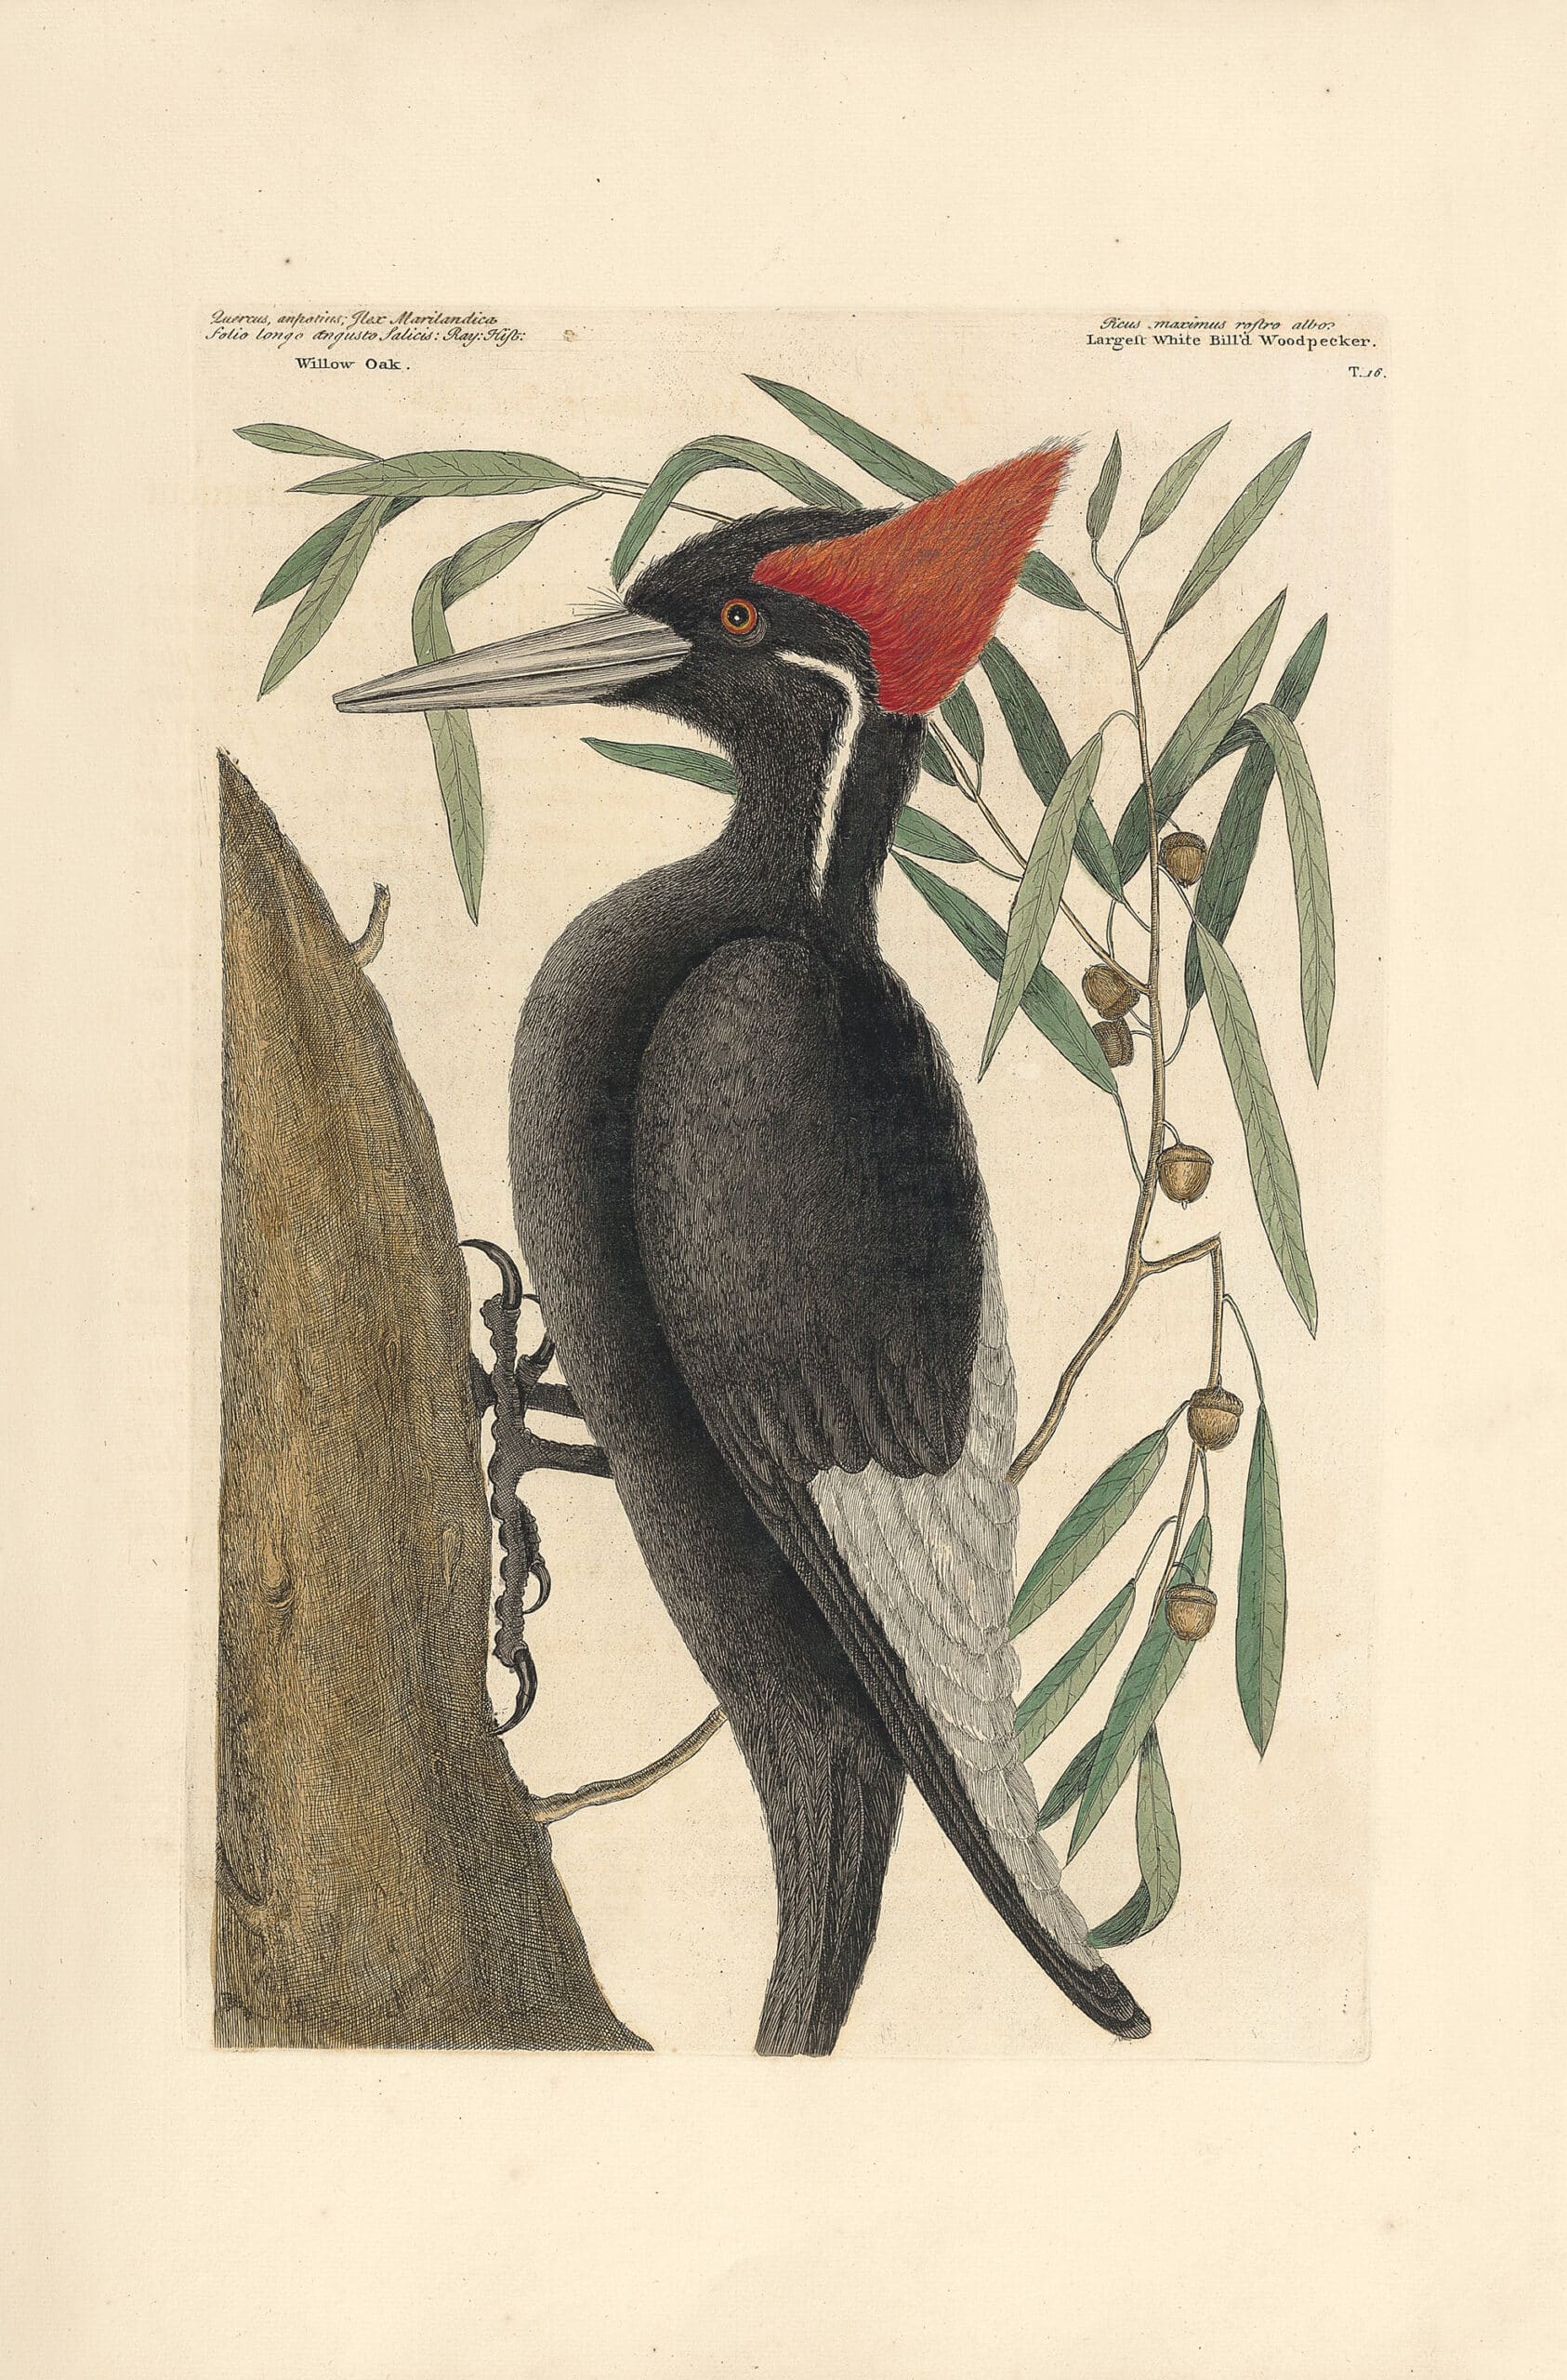 Catesby Pl. 16, The Largest White-billed Woodpecker